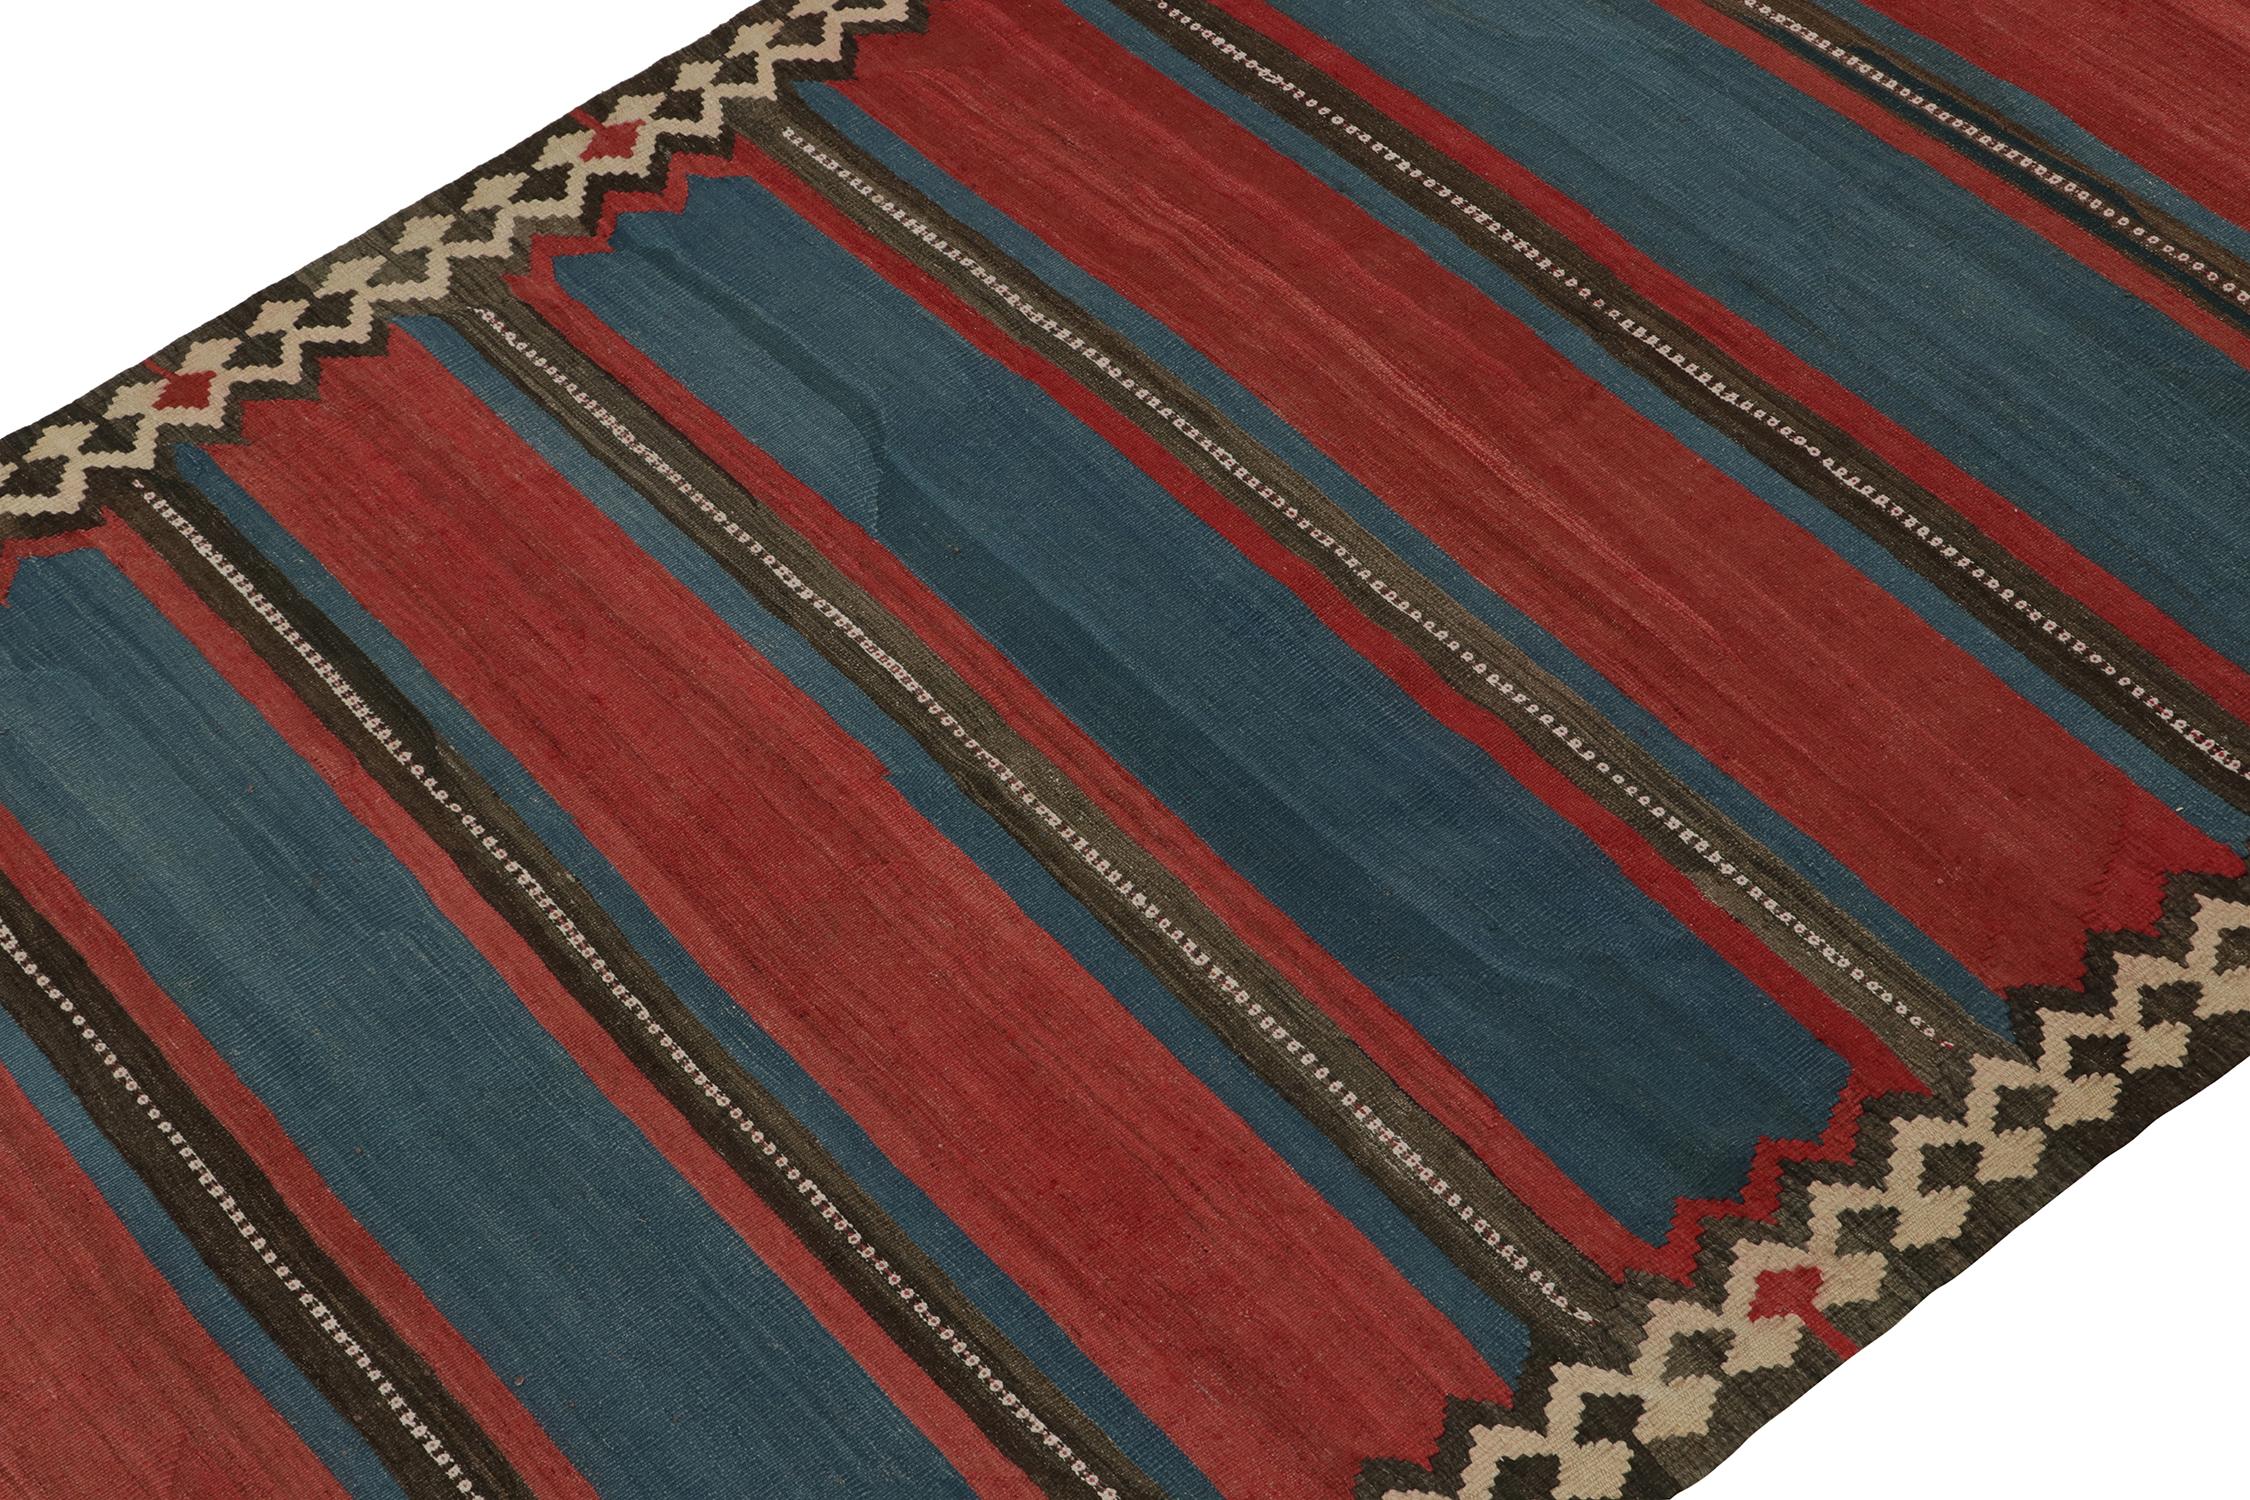 Turkish Vintage Shahsavan Persian Kilim in Red and Blue Stripes, by Rug & Kilim For Sale